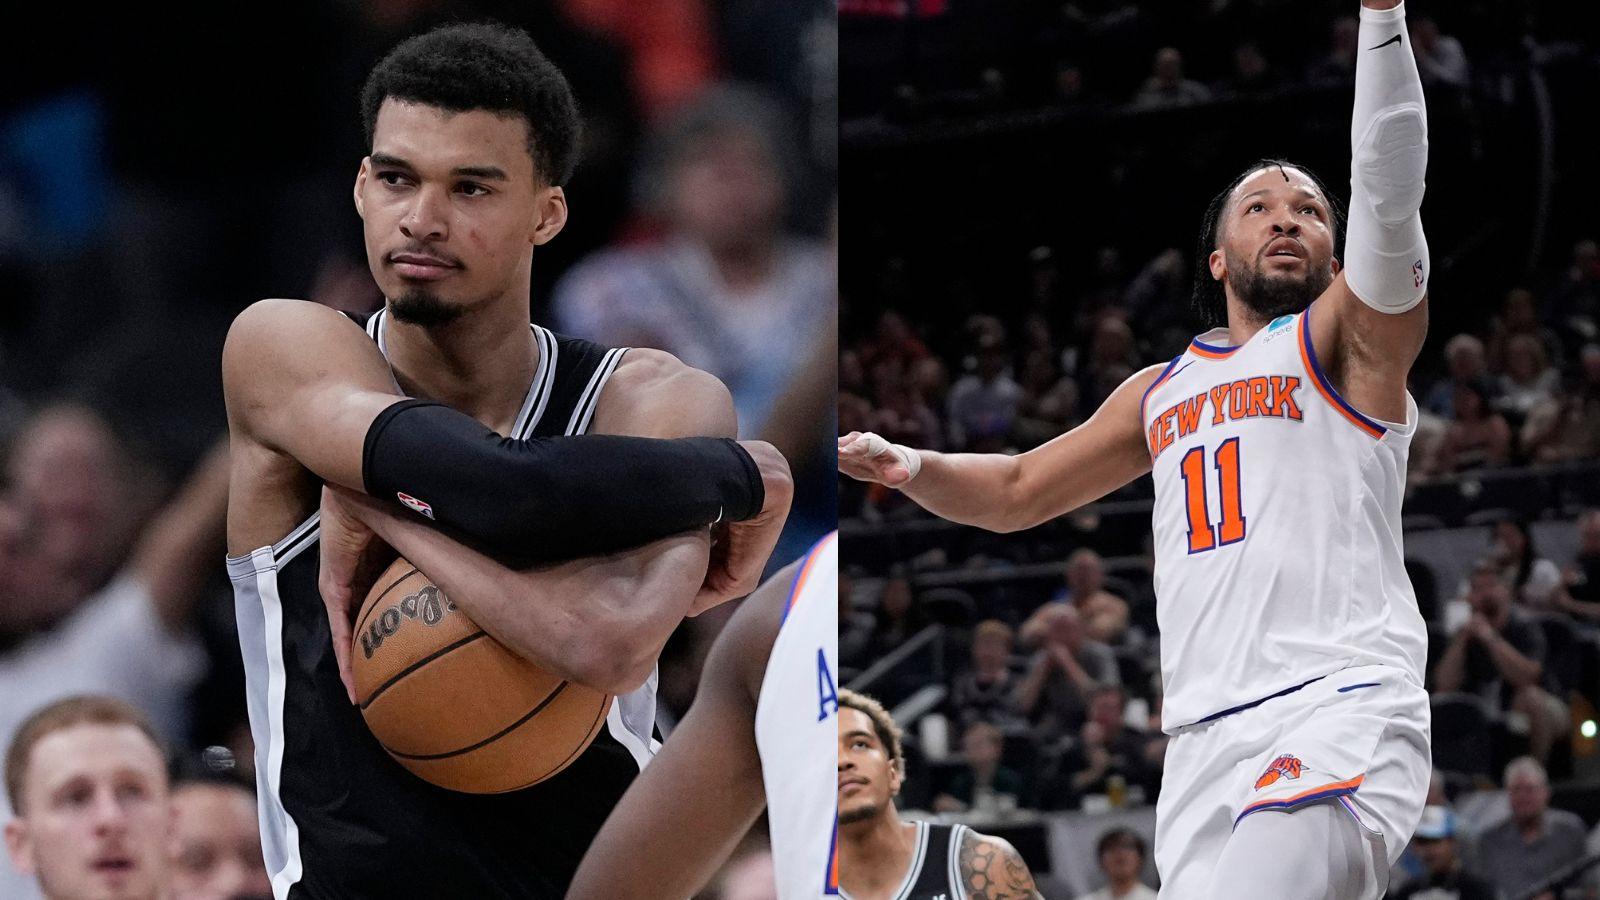 Victor Wembanyama (left) and Jalen Brunson (right) in the San Antonio Spurs' 130-126 win over the New York Knicks on 3/29/2024.